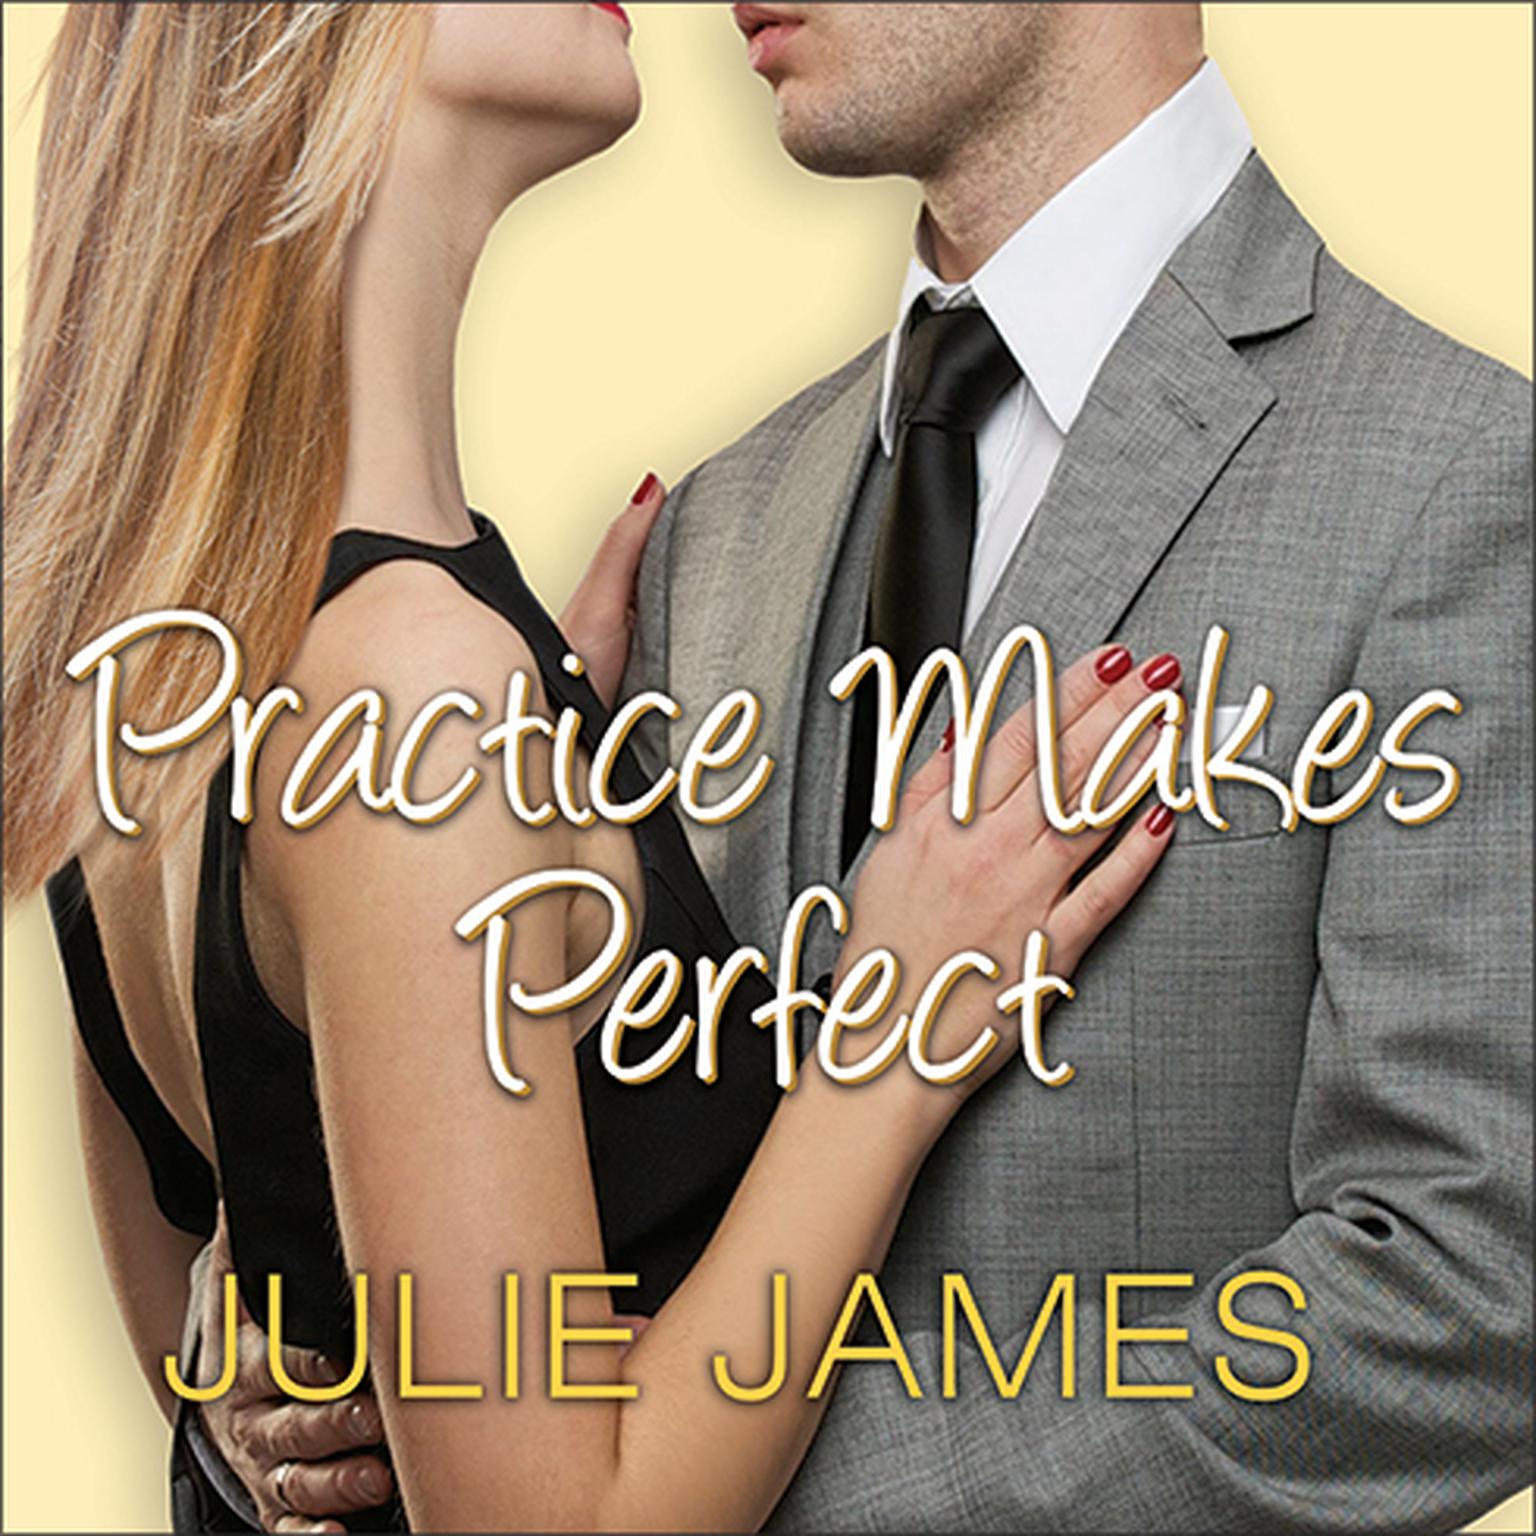 Practice Makes Perfect Audiobook, by Julie James